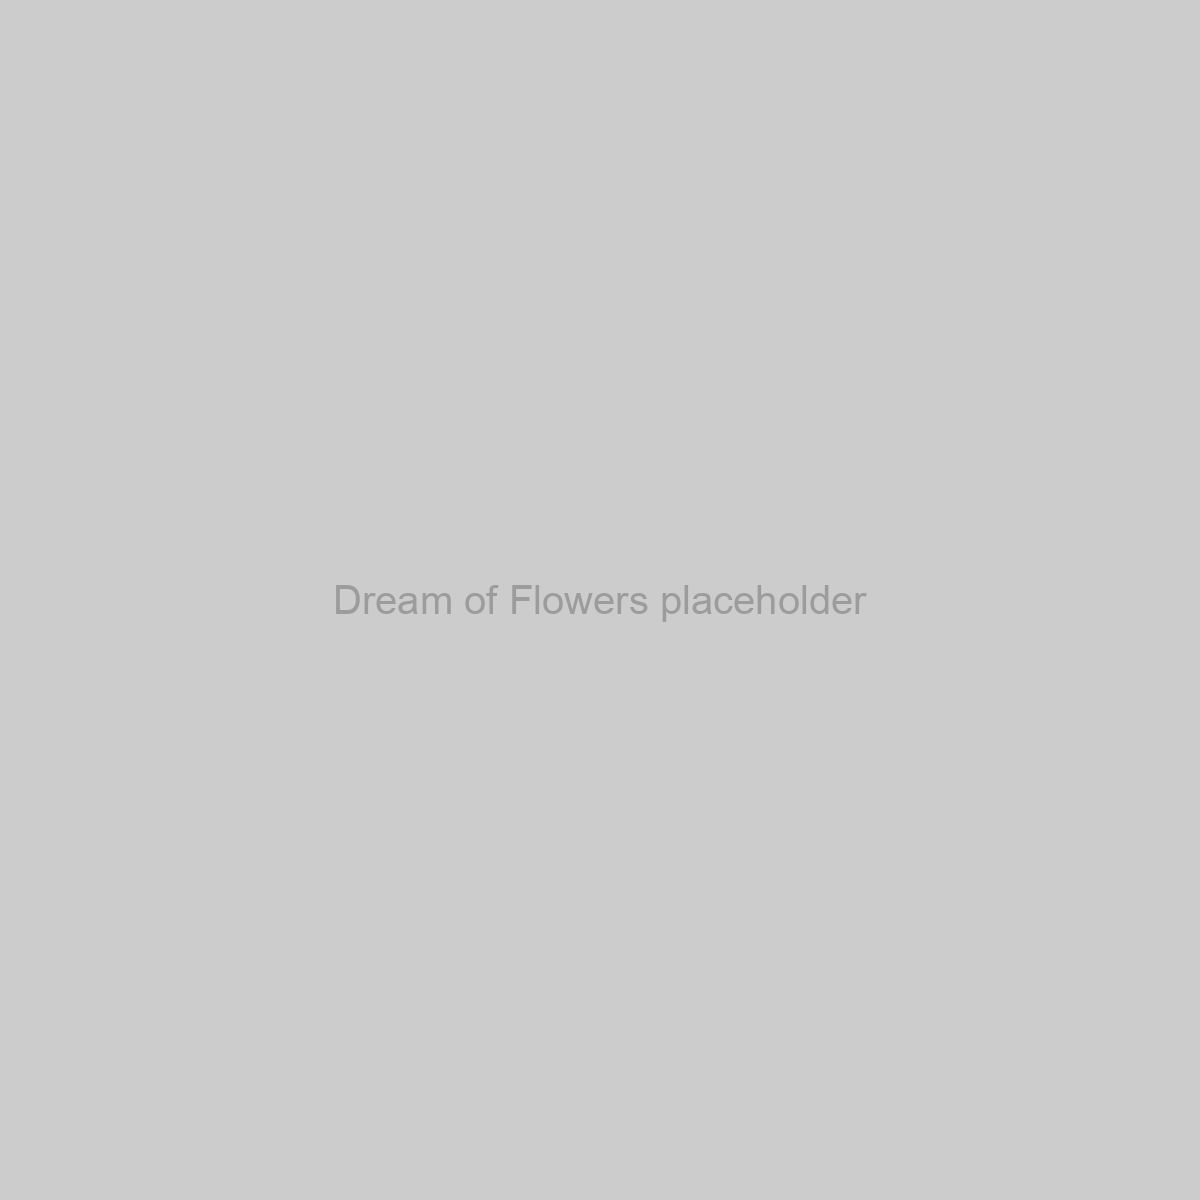 Dream of Flowers Placeholder Image